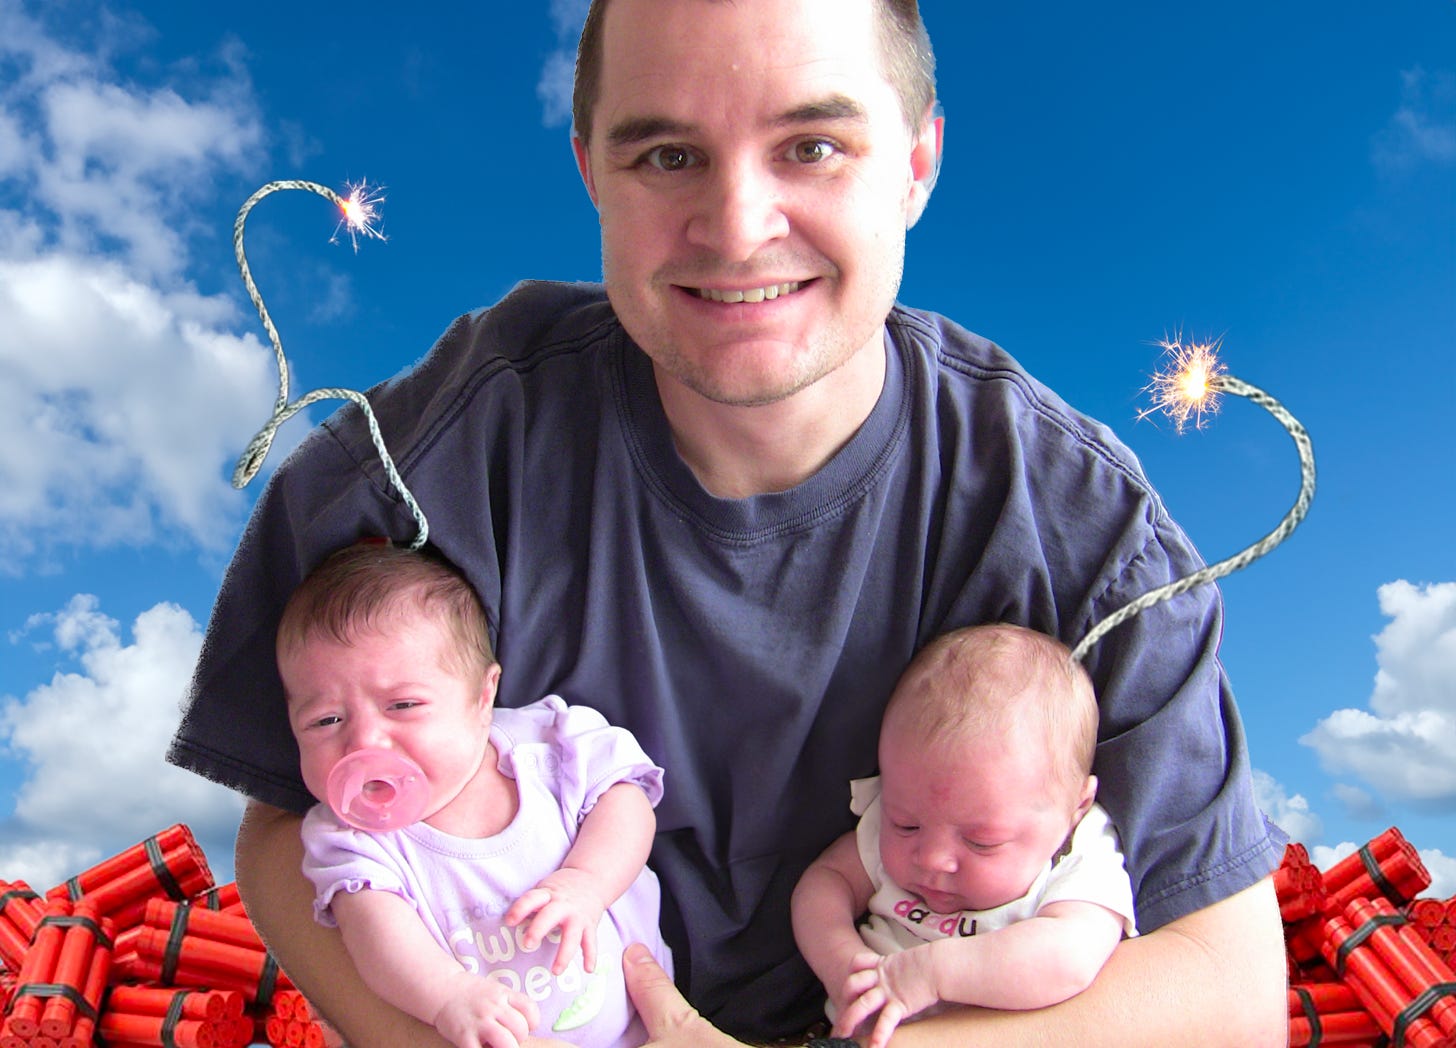 Author holds his infant daughters, with lit fuses Photoshopped onto their heads